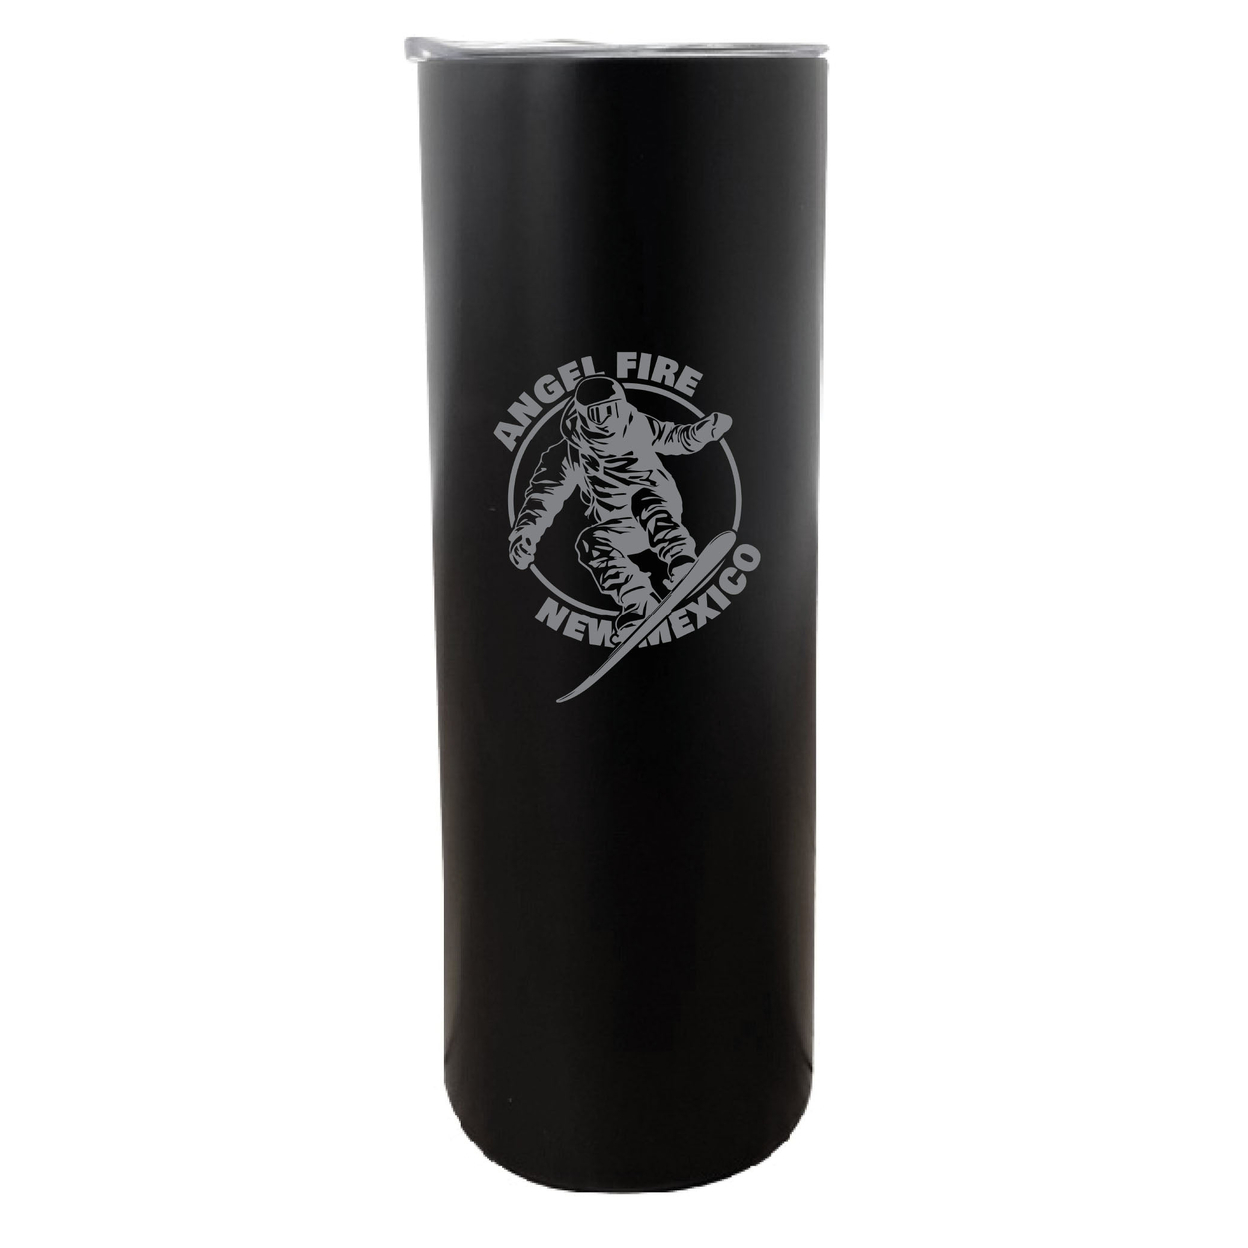 Angel Fire New Mexico Souvenir 20 Oz Engraved Insulated Stainless Steel Skinny Tumbler - Black,,4-Pack